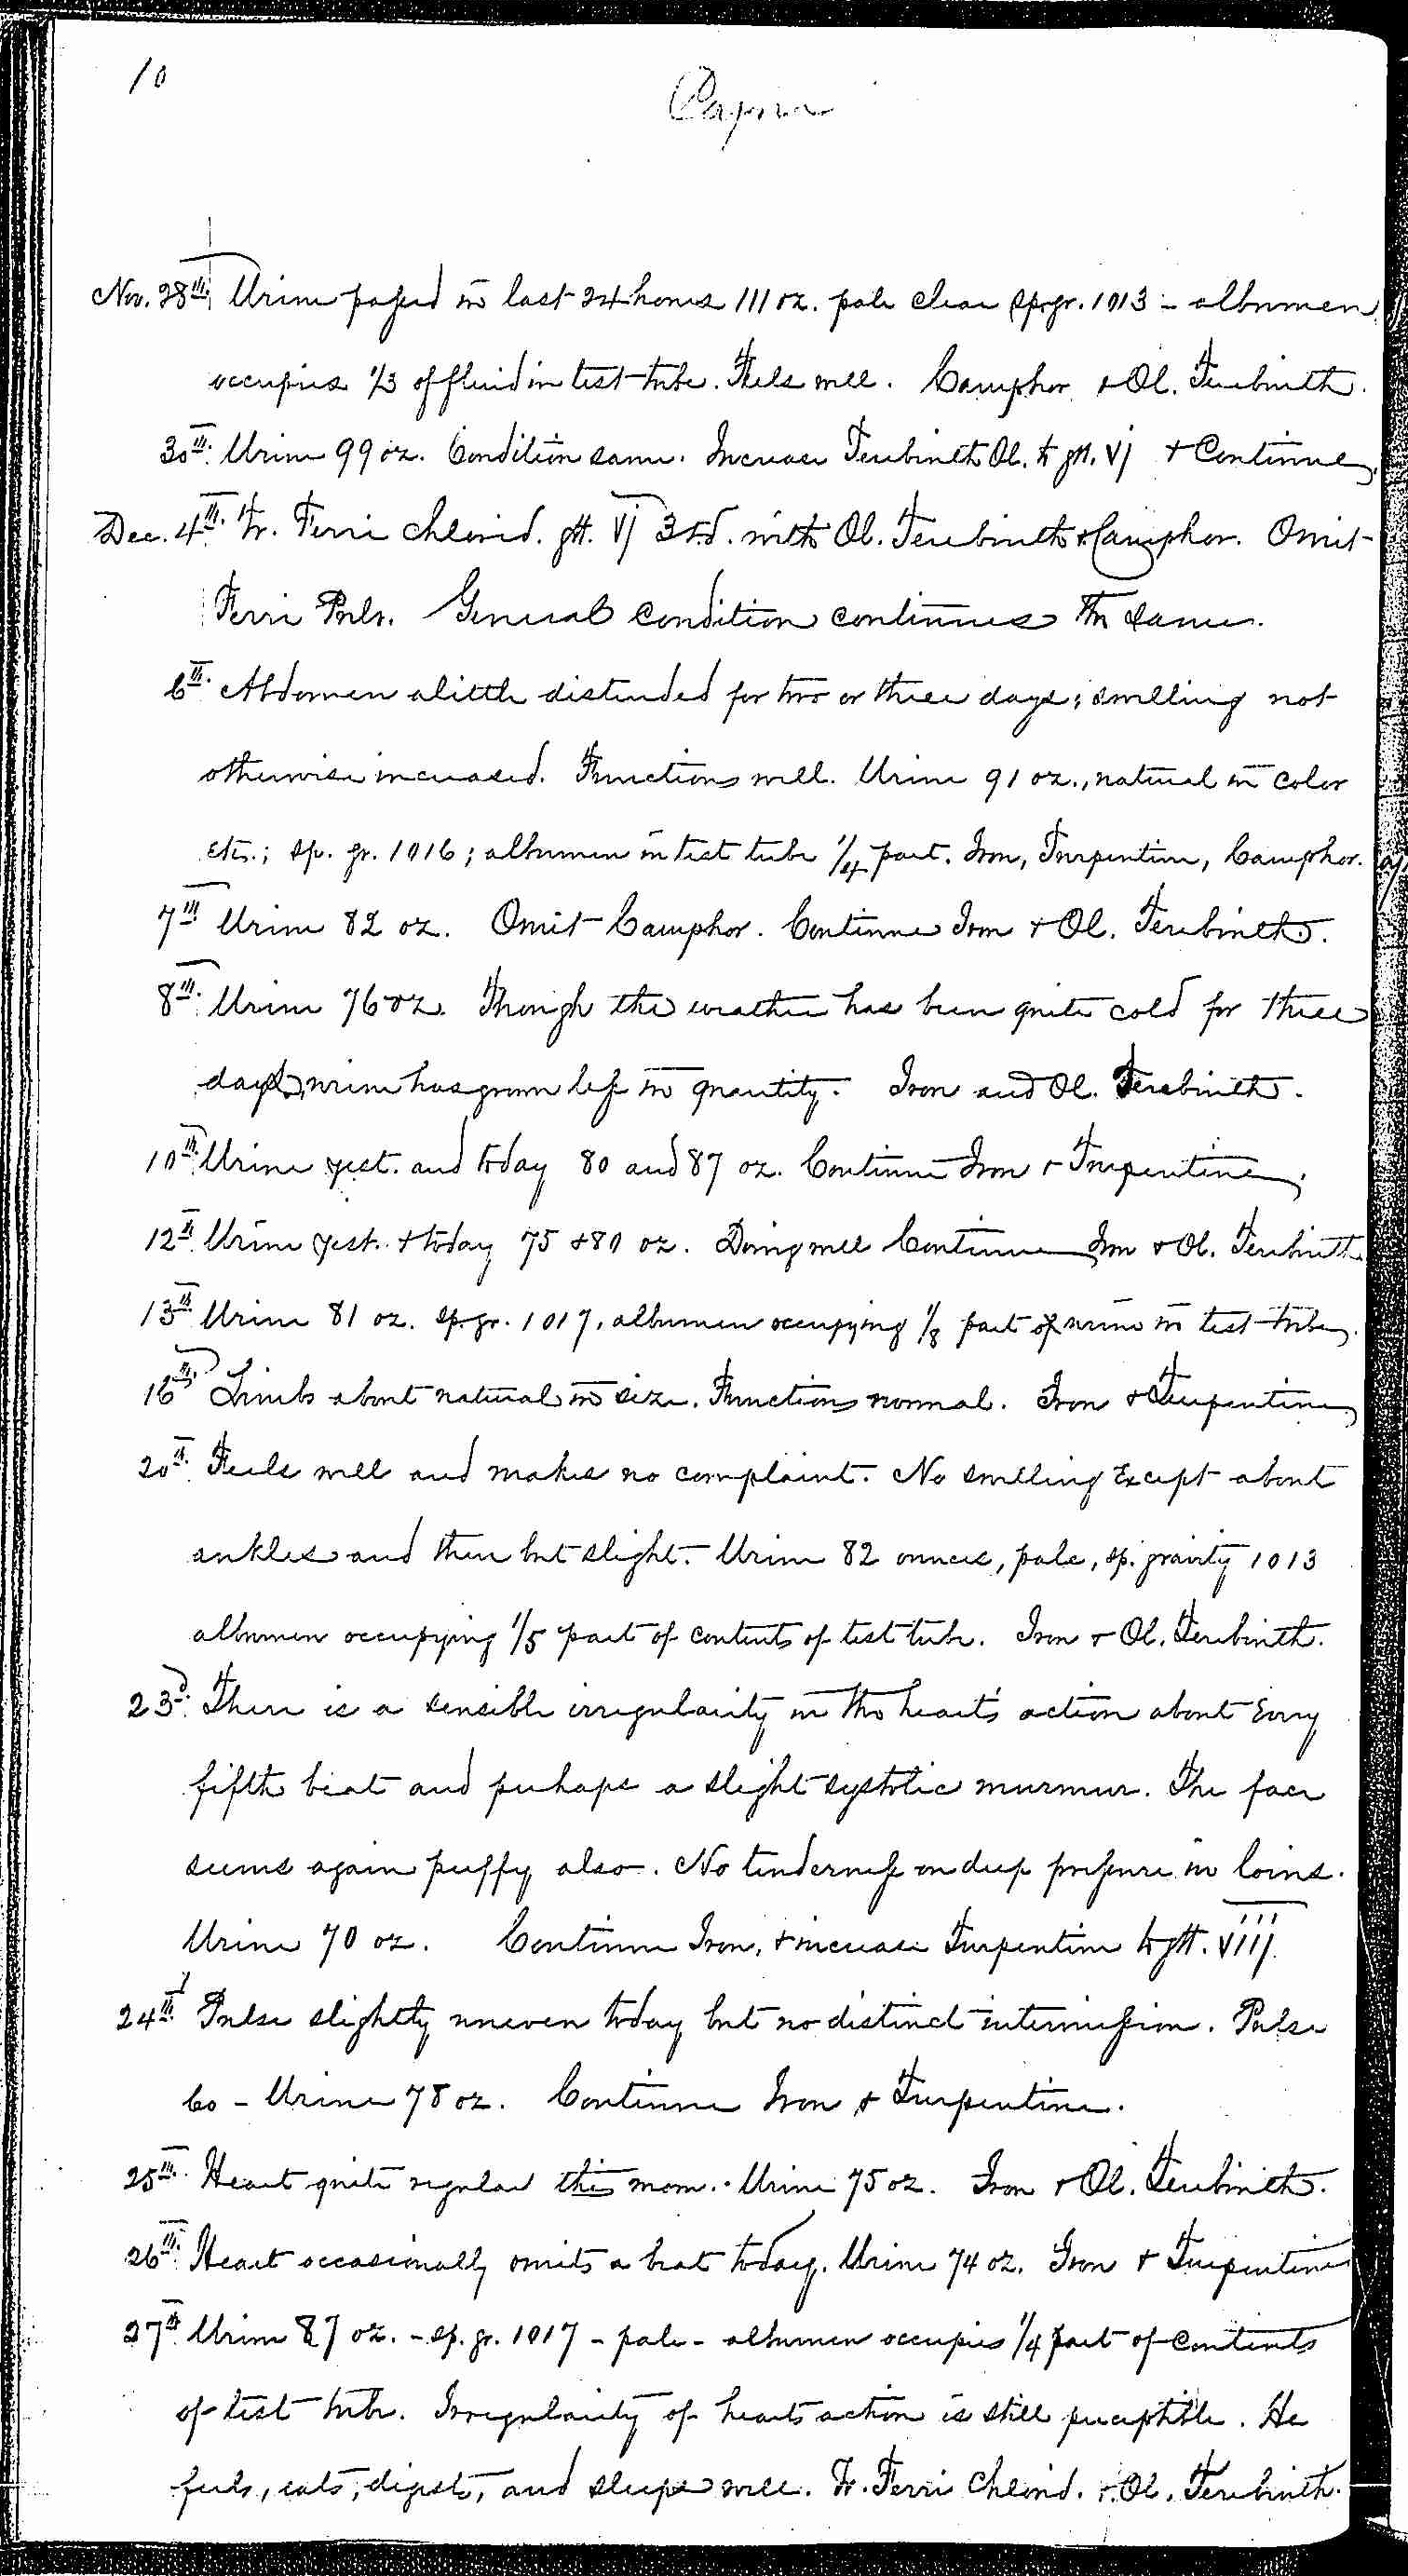 Entry for Bernard Coyne (page 10 of 13) in the log Hospital Tickets and Case Papers - Naval Hospital - Washington, D.C. - 1868-69